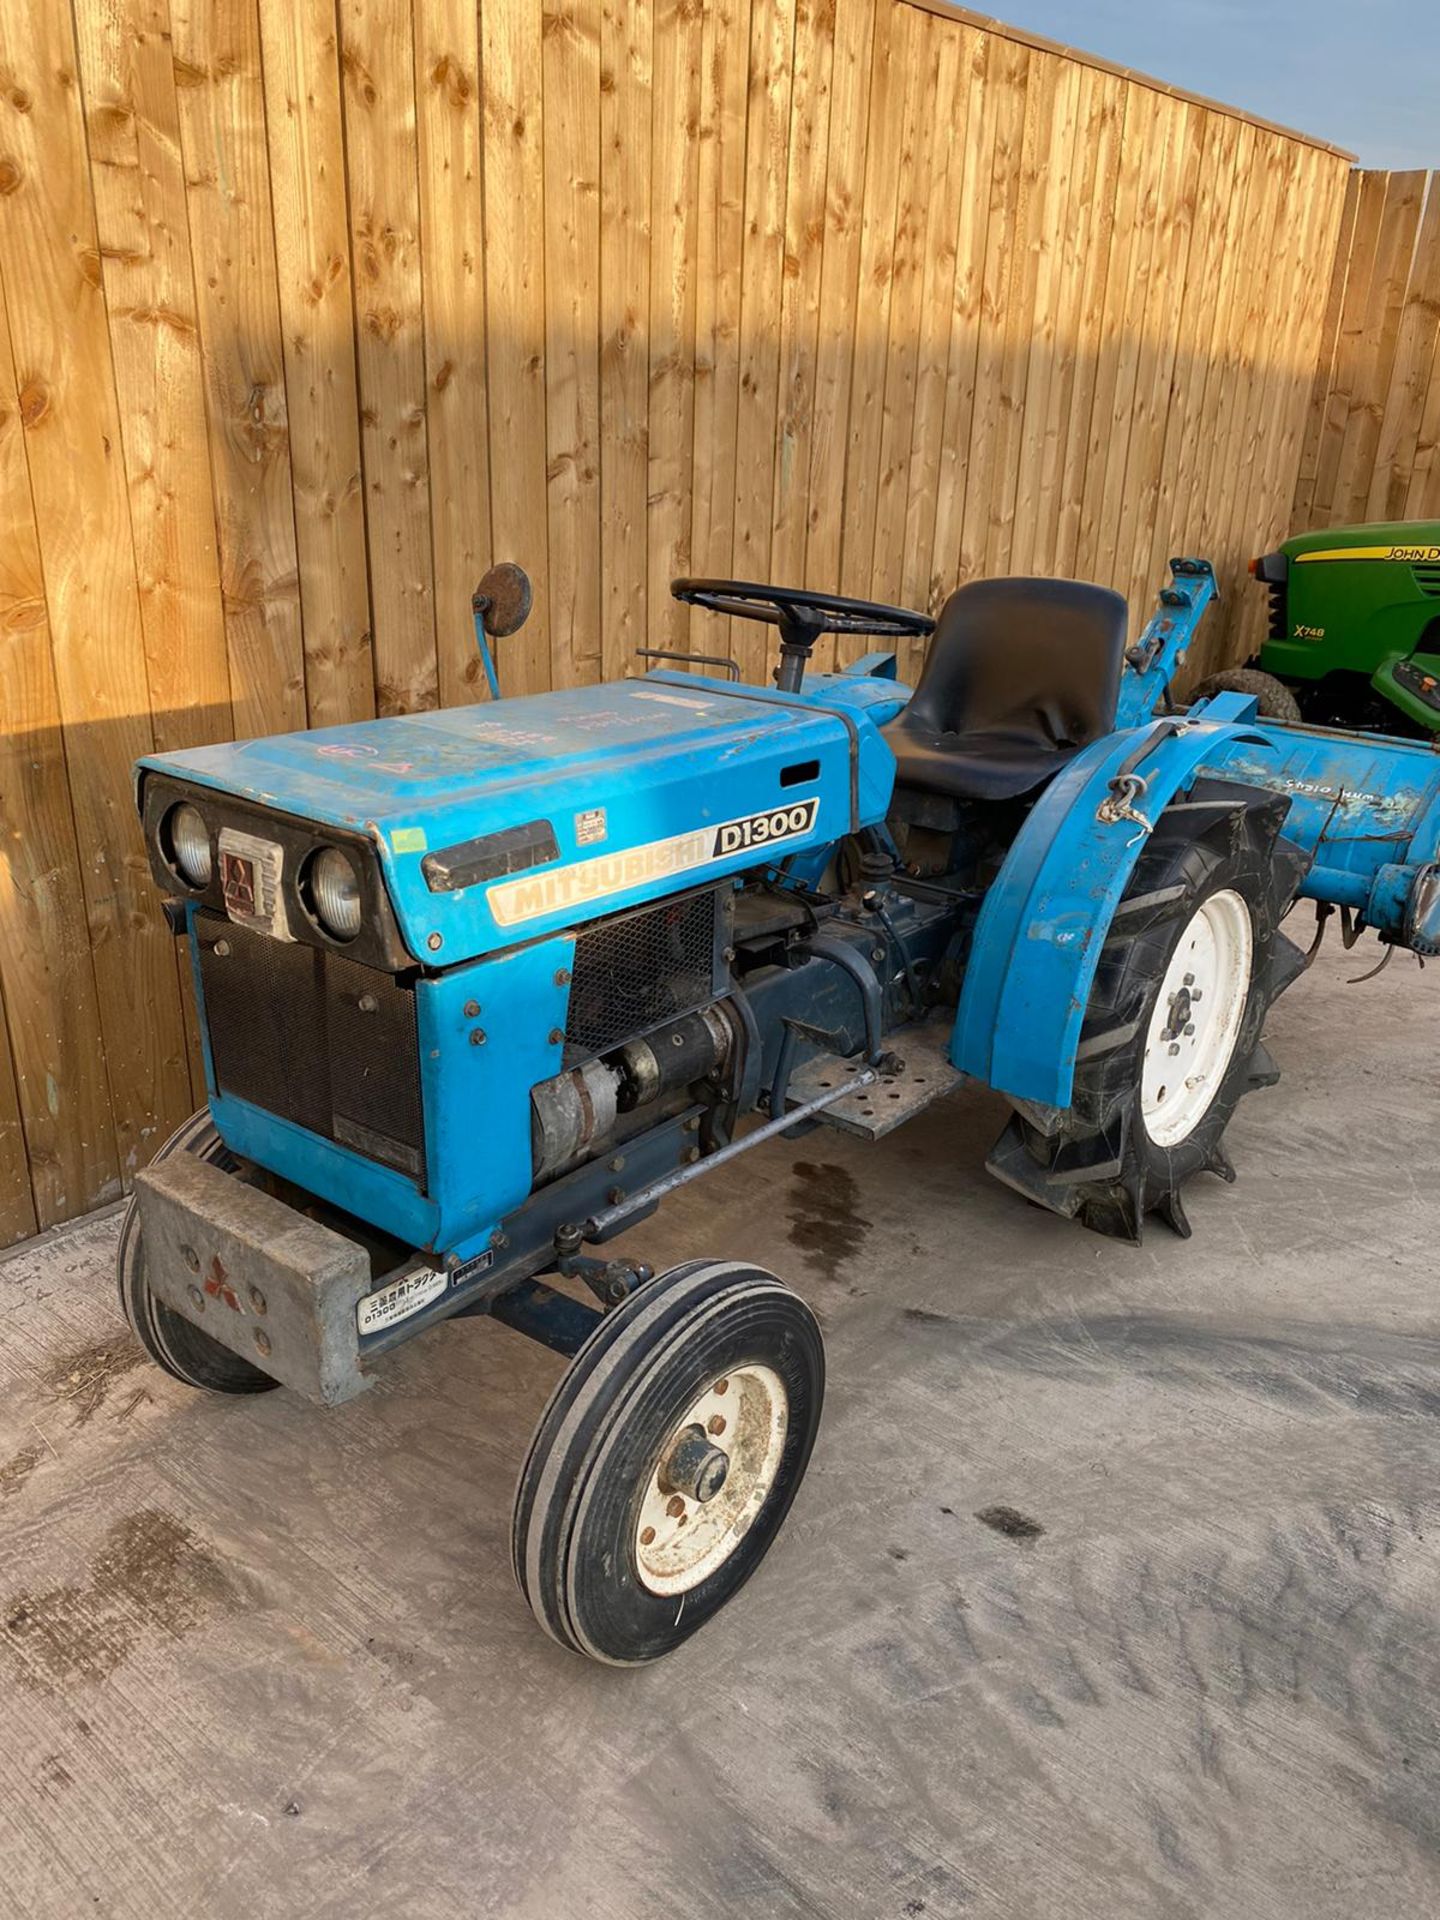 MITSUBISHI D1300 DIESEL COMPACT TRACTOR AND ROTOVATOR LOCATION CO DURHAM